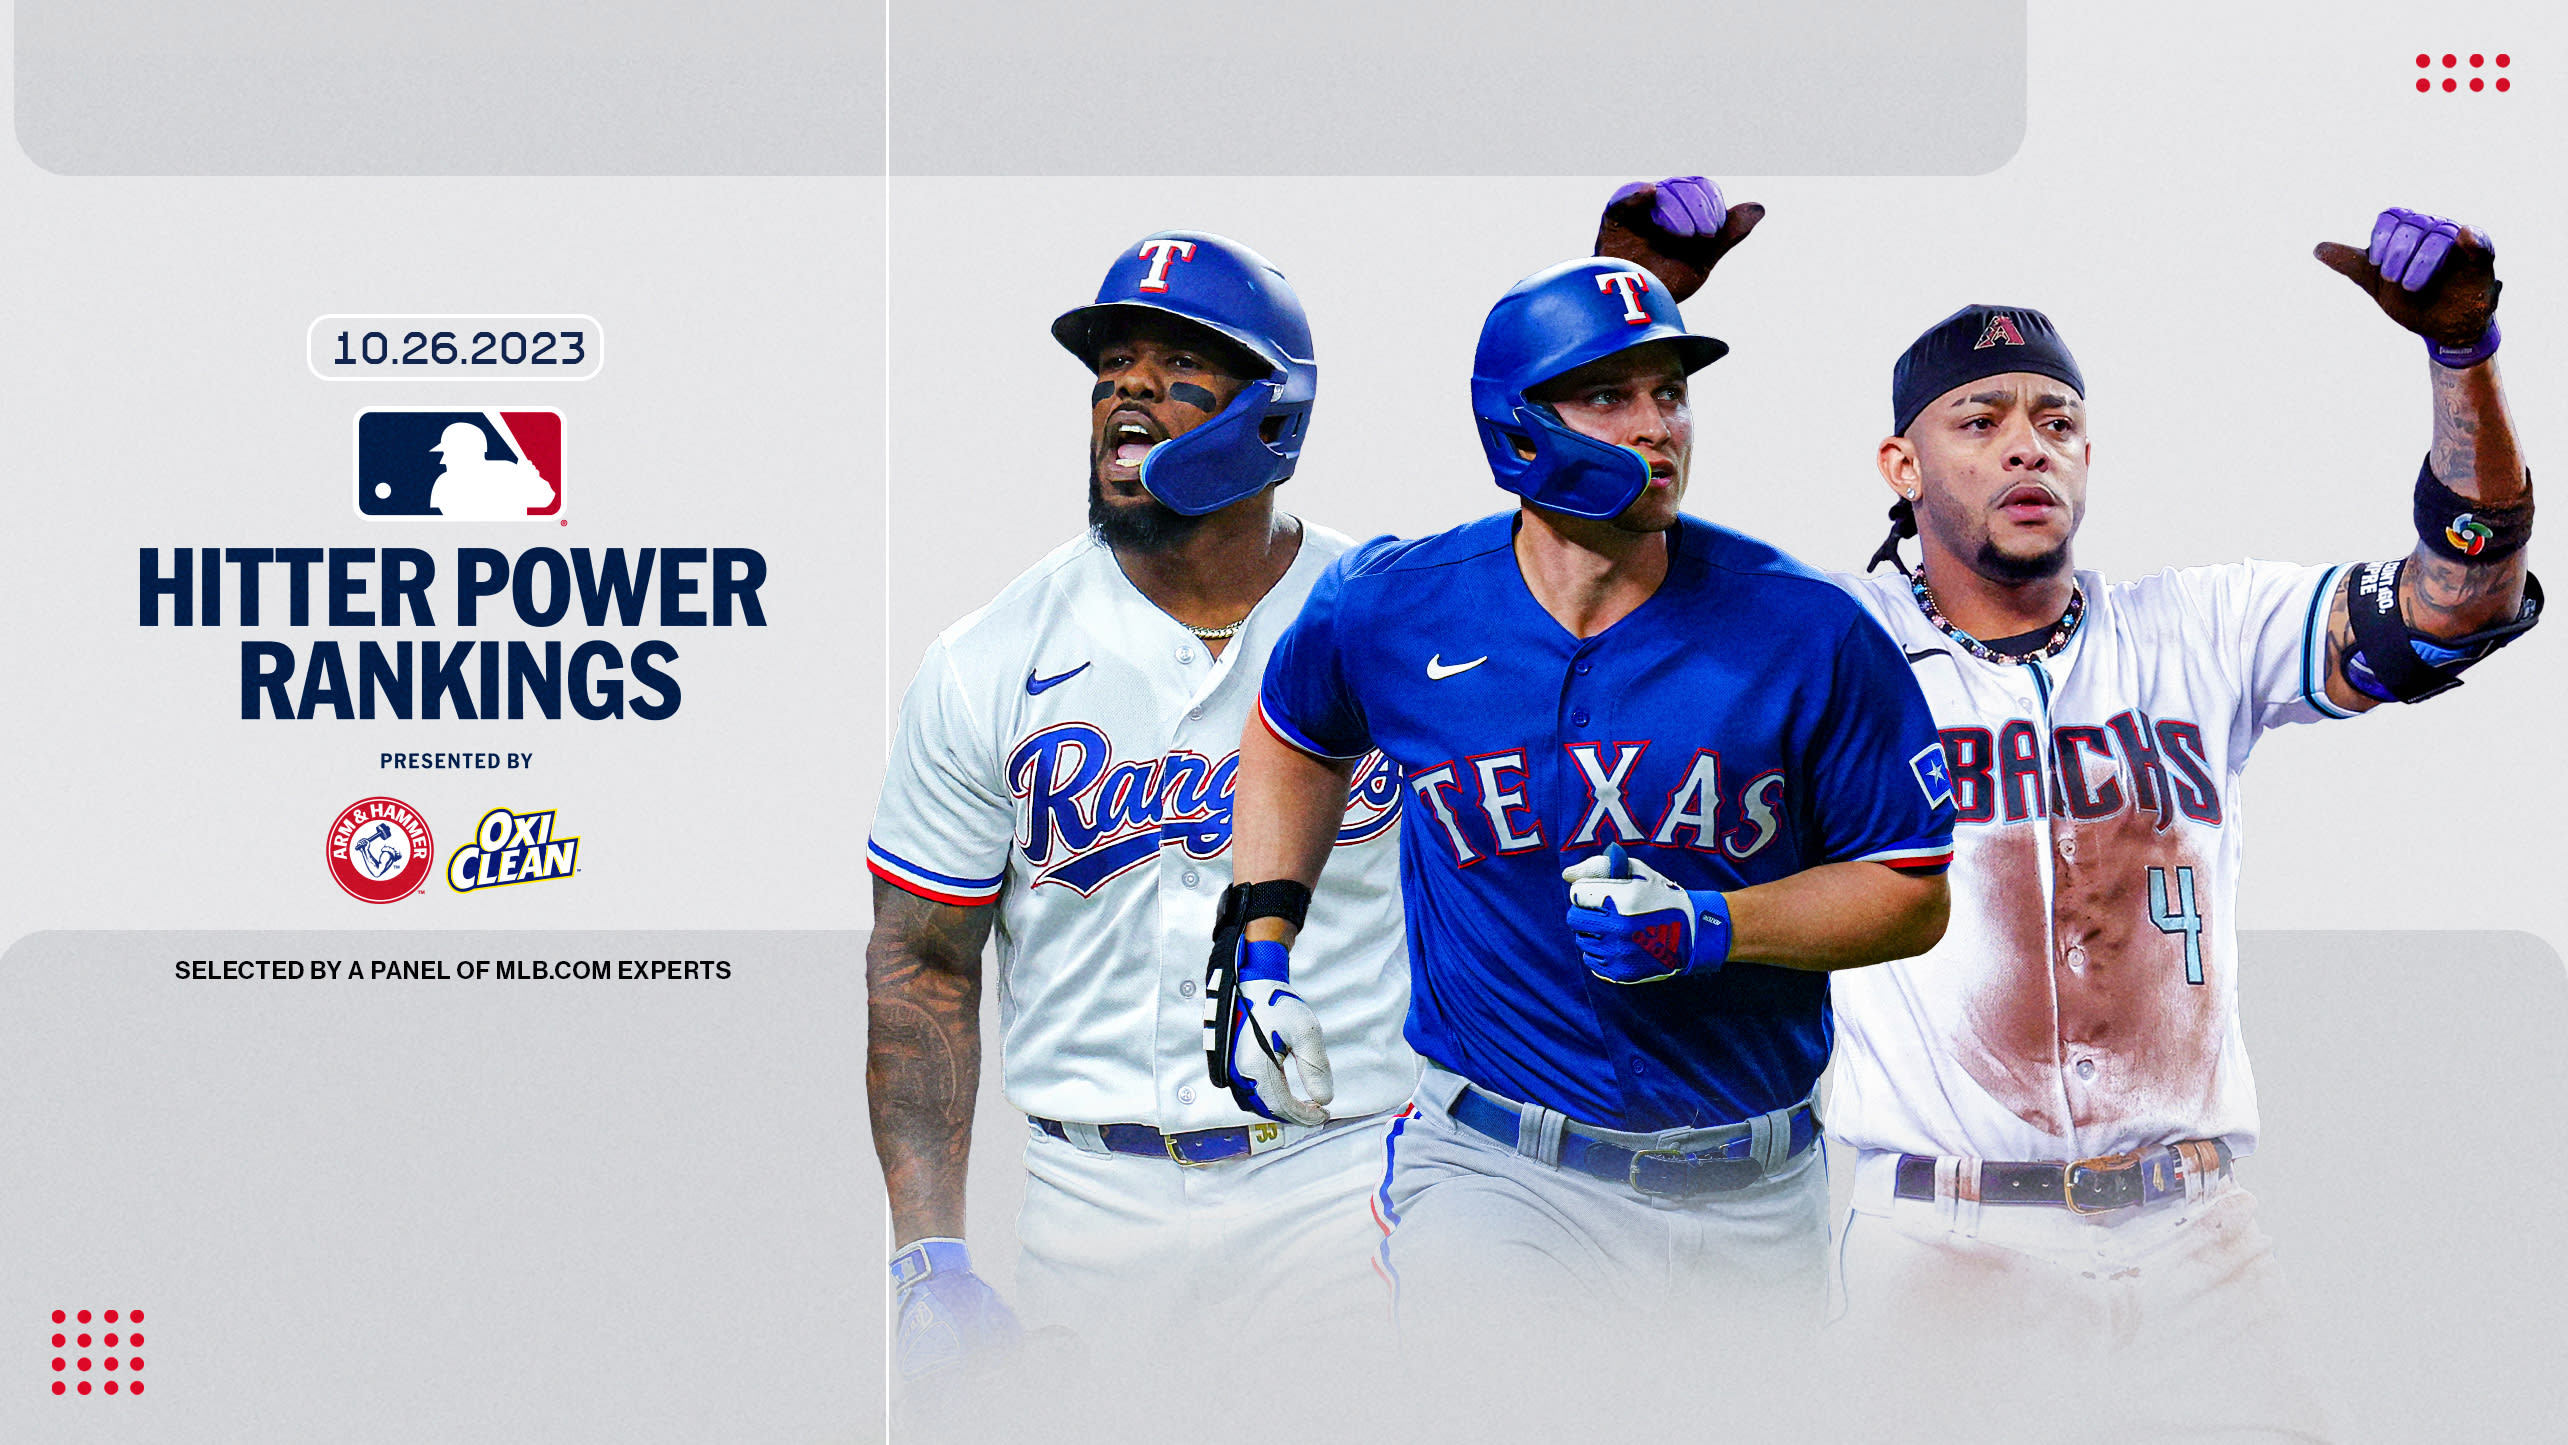 Adolis García, Corey Seager and Ketel Marte are pictured next to the Hitter Power Rankings logo